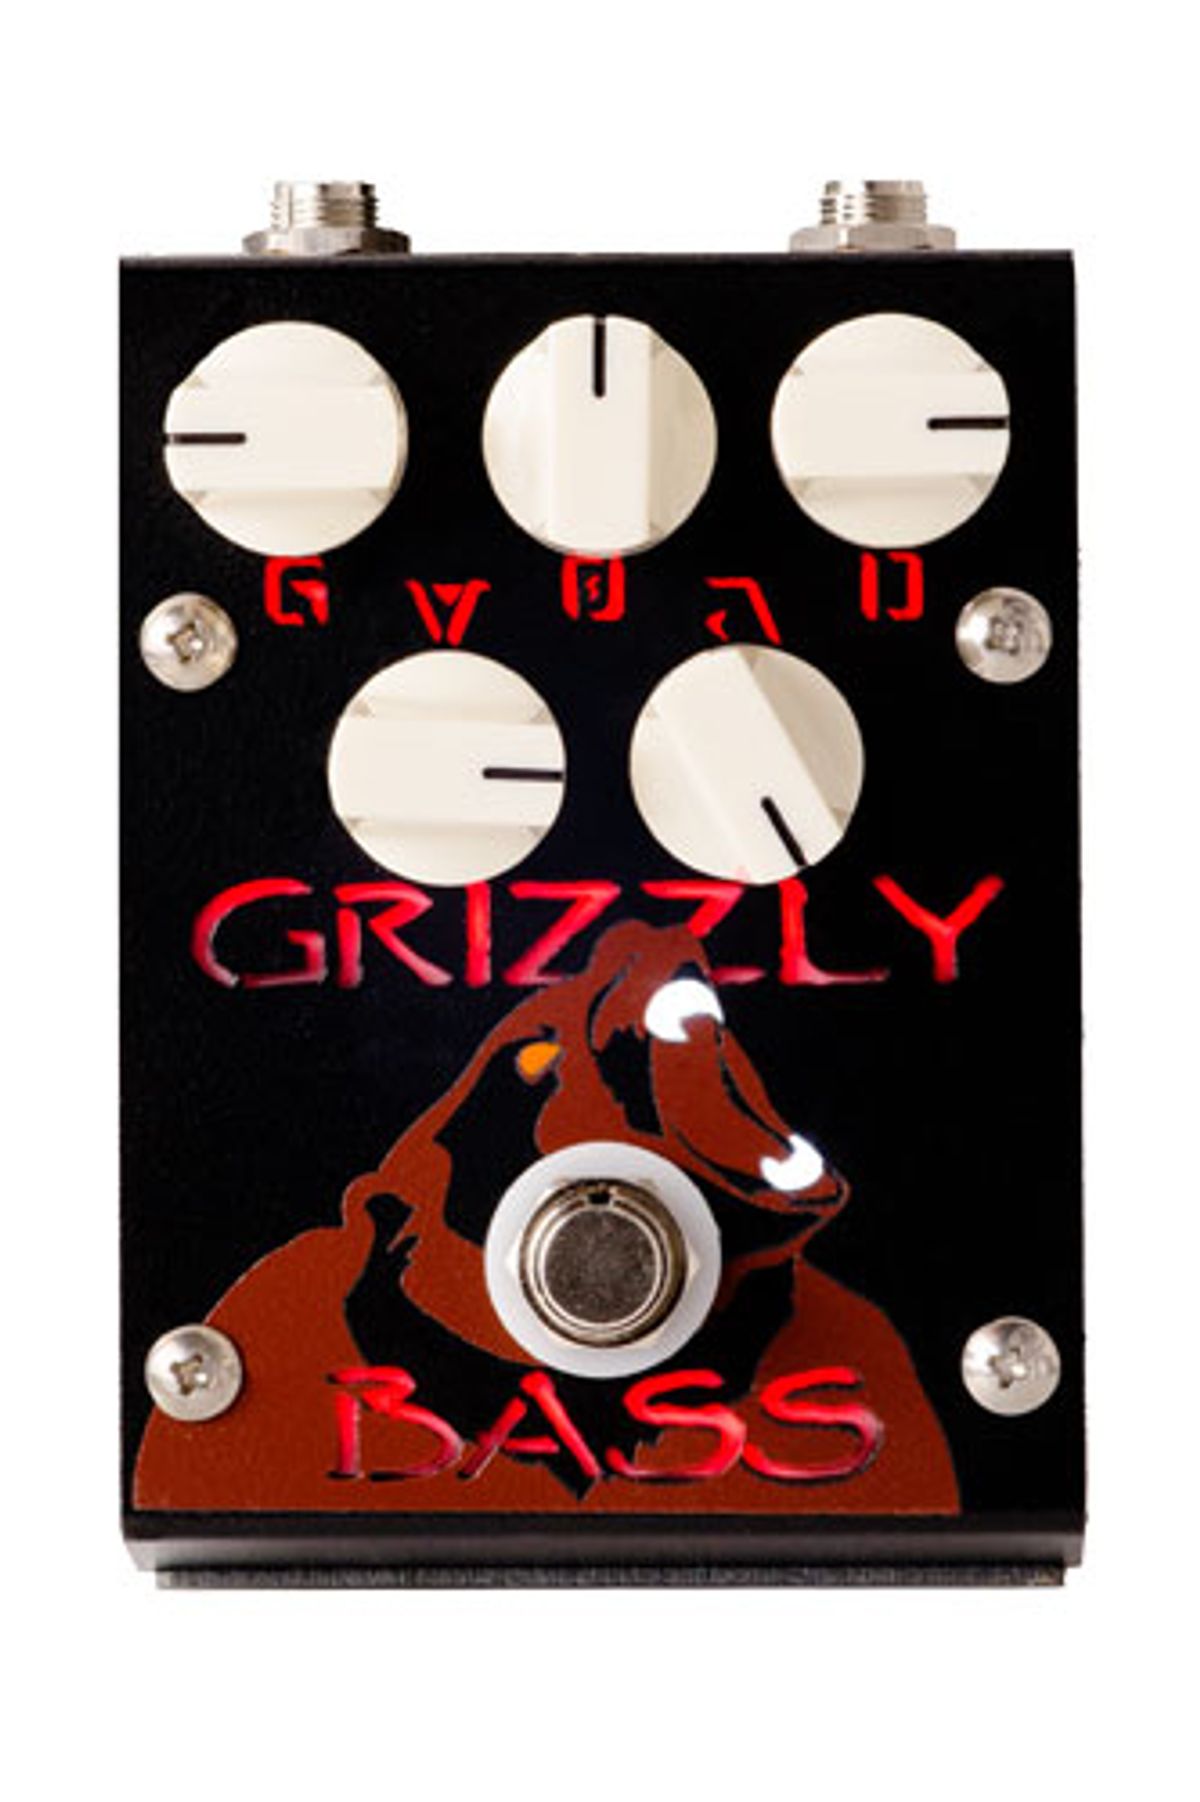 Creation Audio Labs Unveils the Grizzly Bass and Holy Fire 9